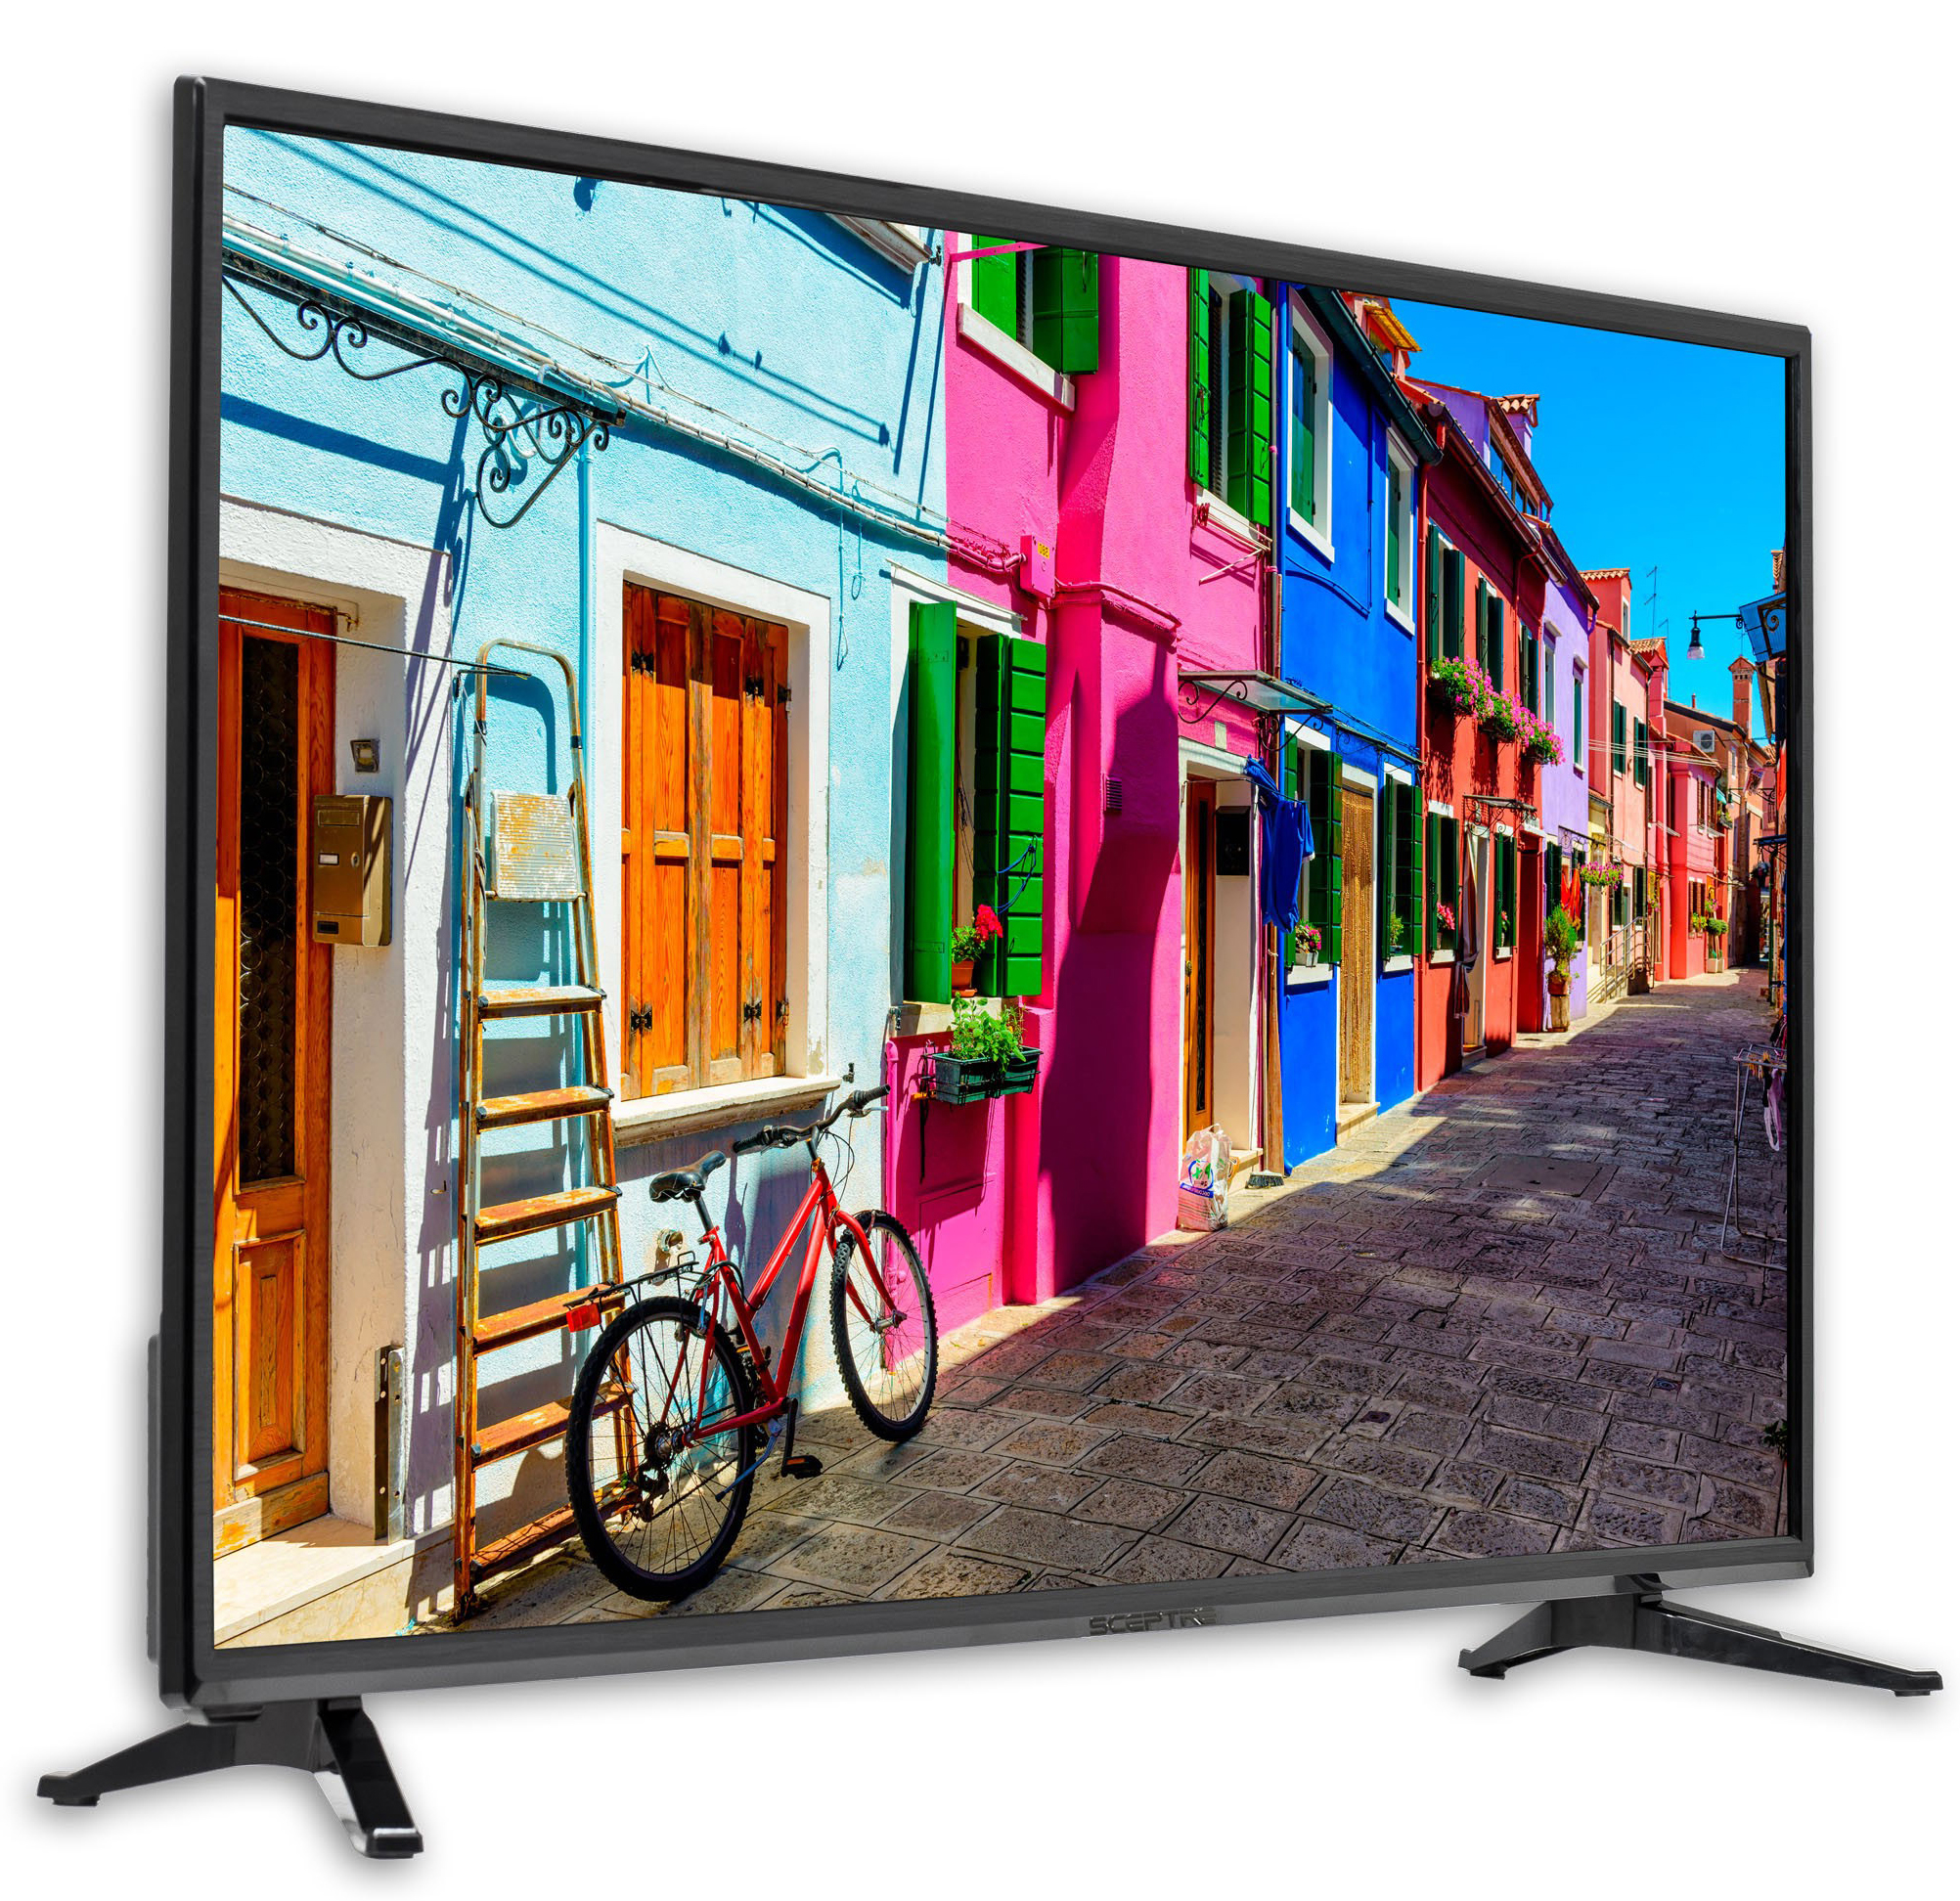 Sceptre 40" Class 1080P FHD LED TV with Built-in DVD E405BD-F - image 2 of 8